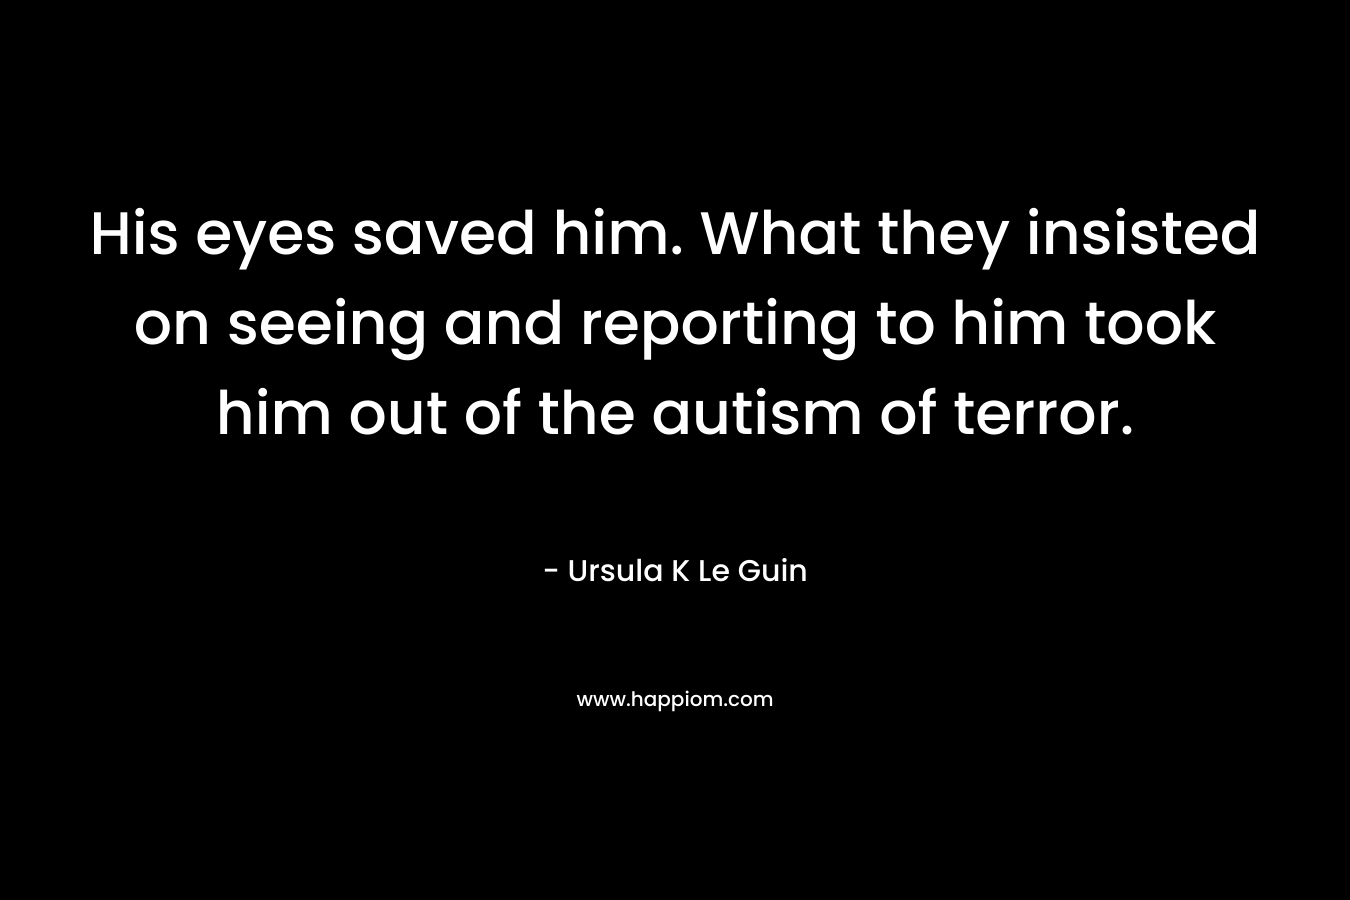 His eyes saved him. What they insisted on seeing and reporting to him took him out of the autism of terror. – Ursula K Le Guin